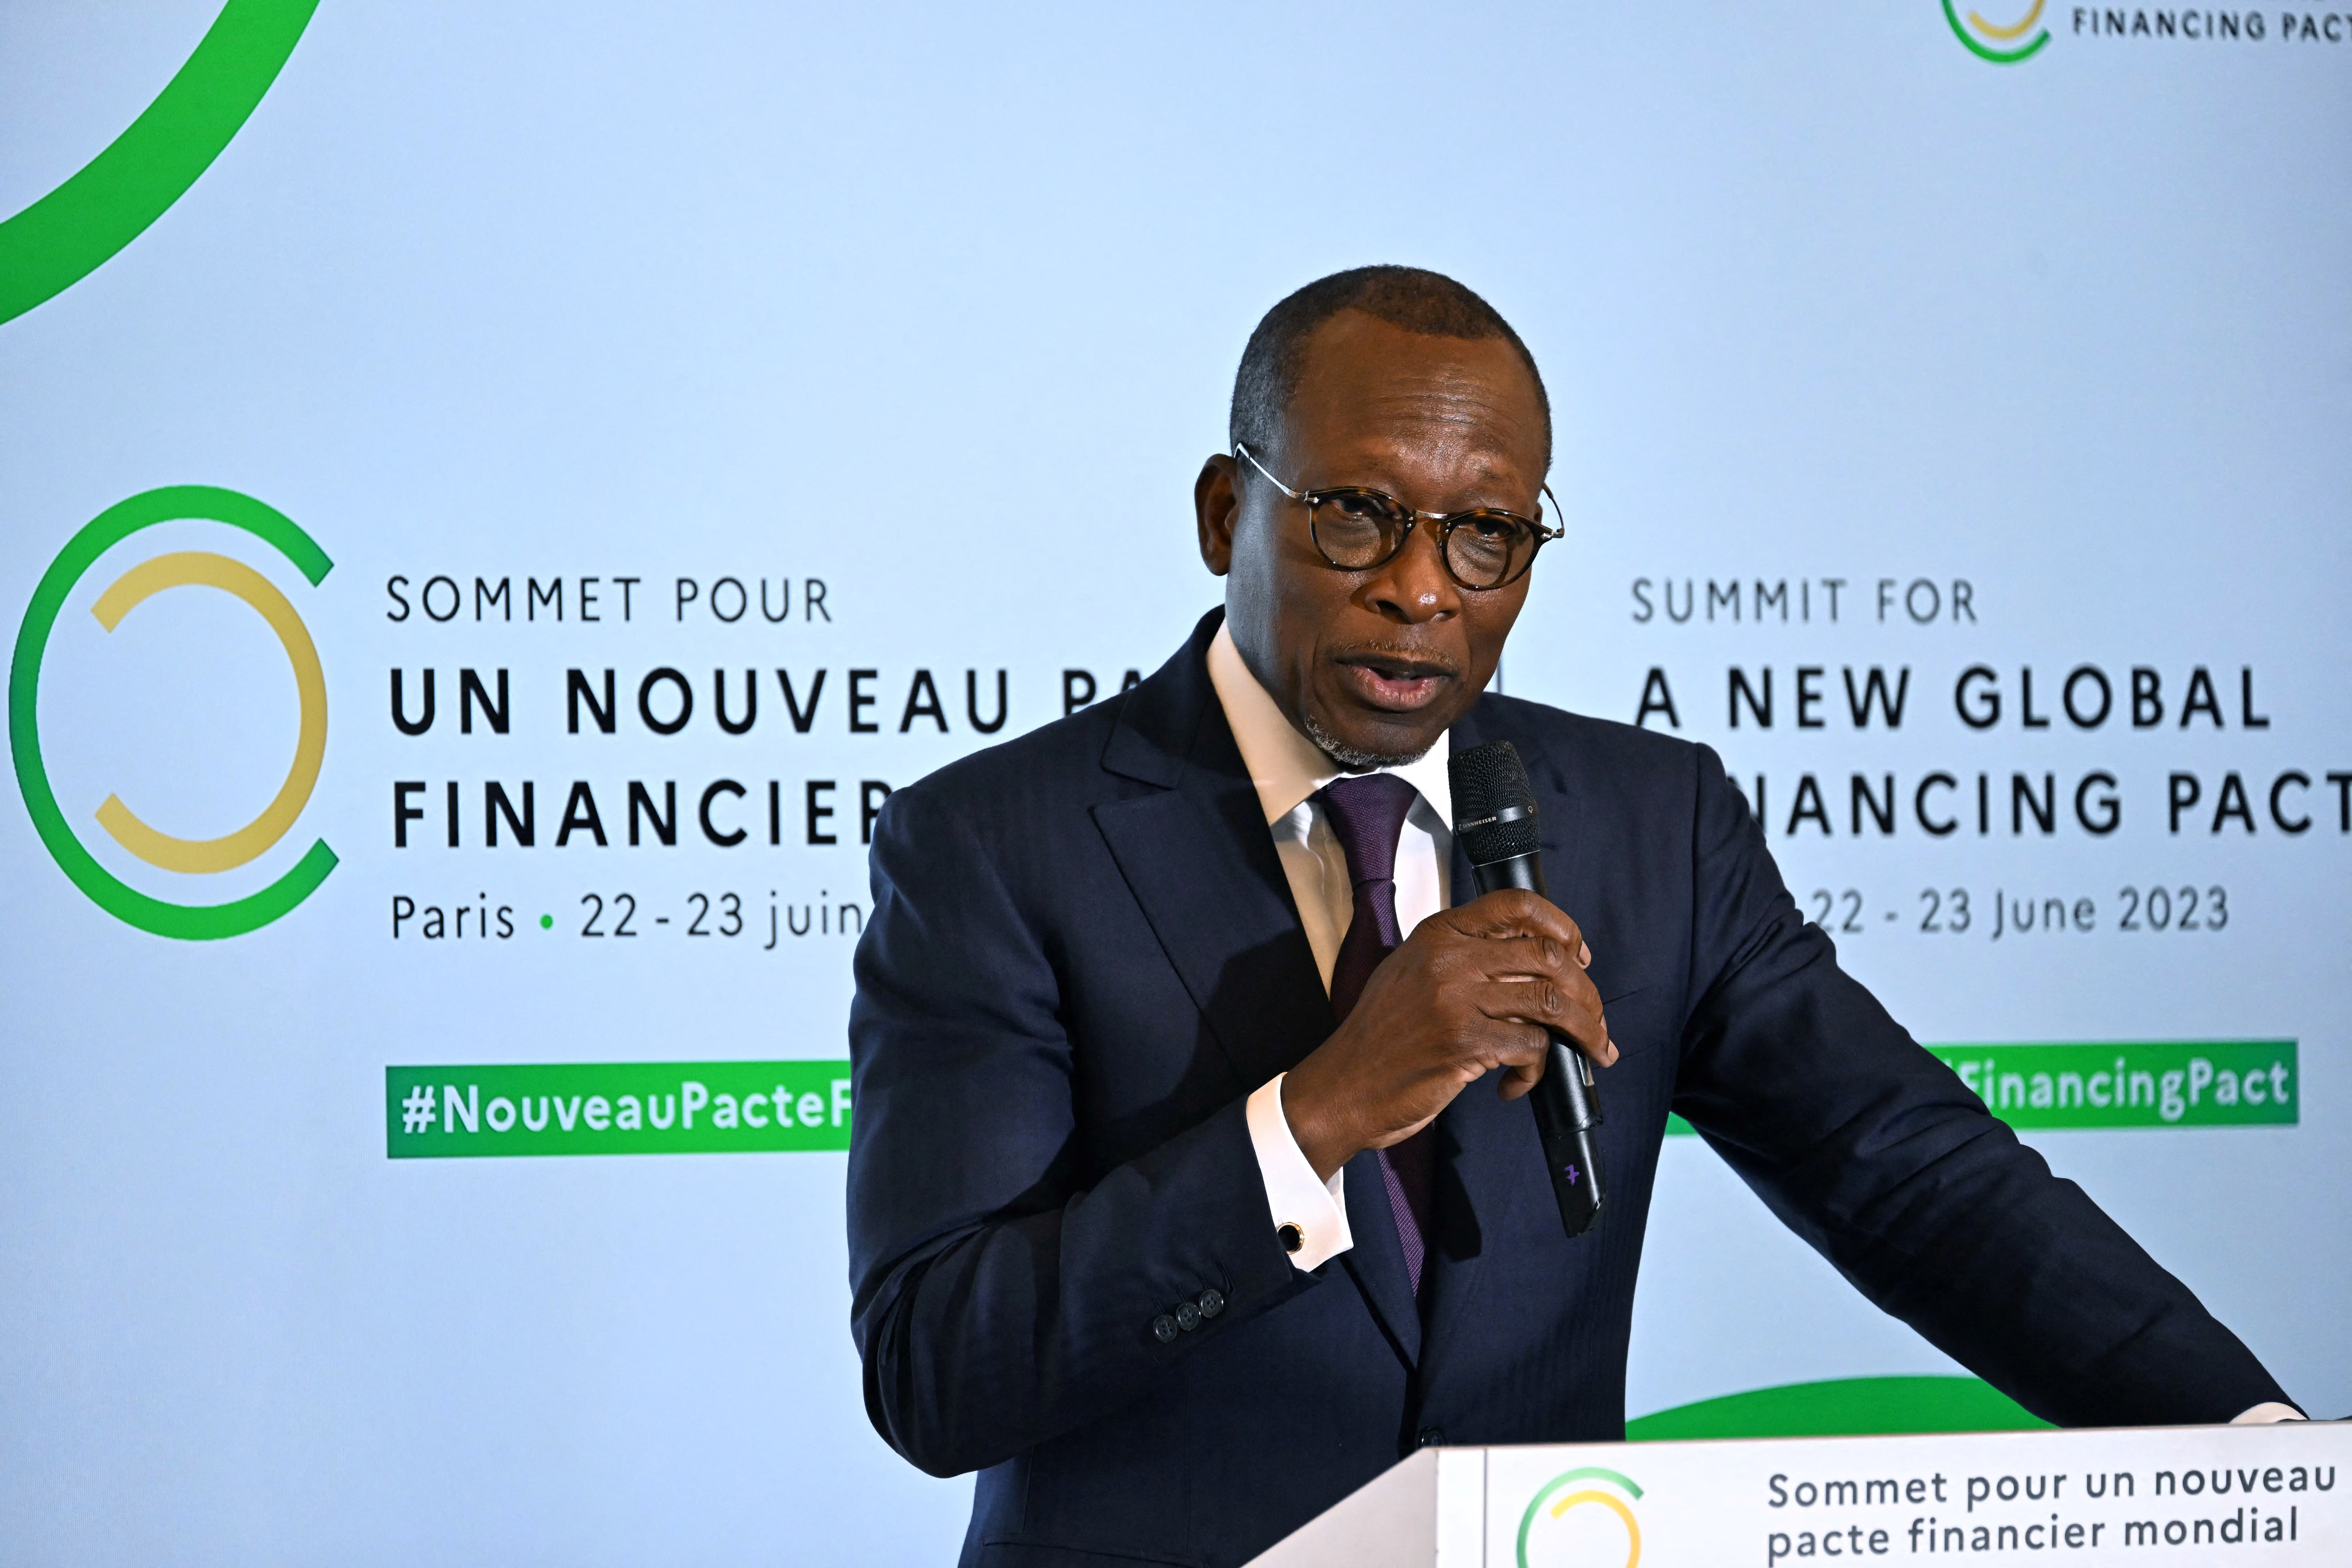 New Global Financial Pact Summit in Paris